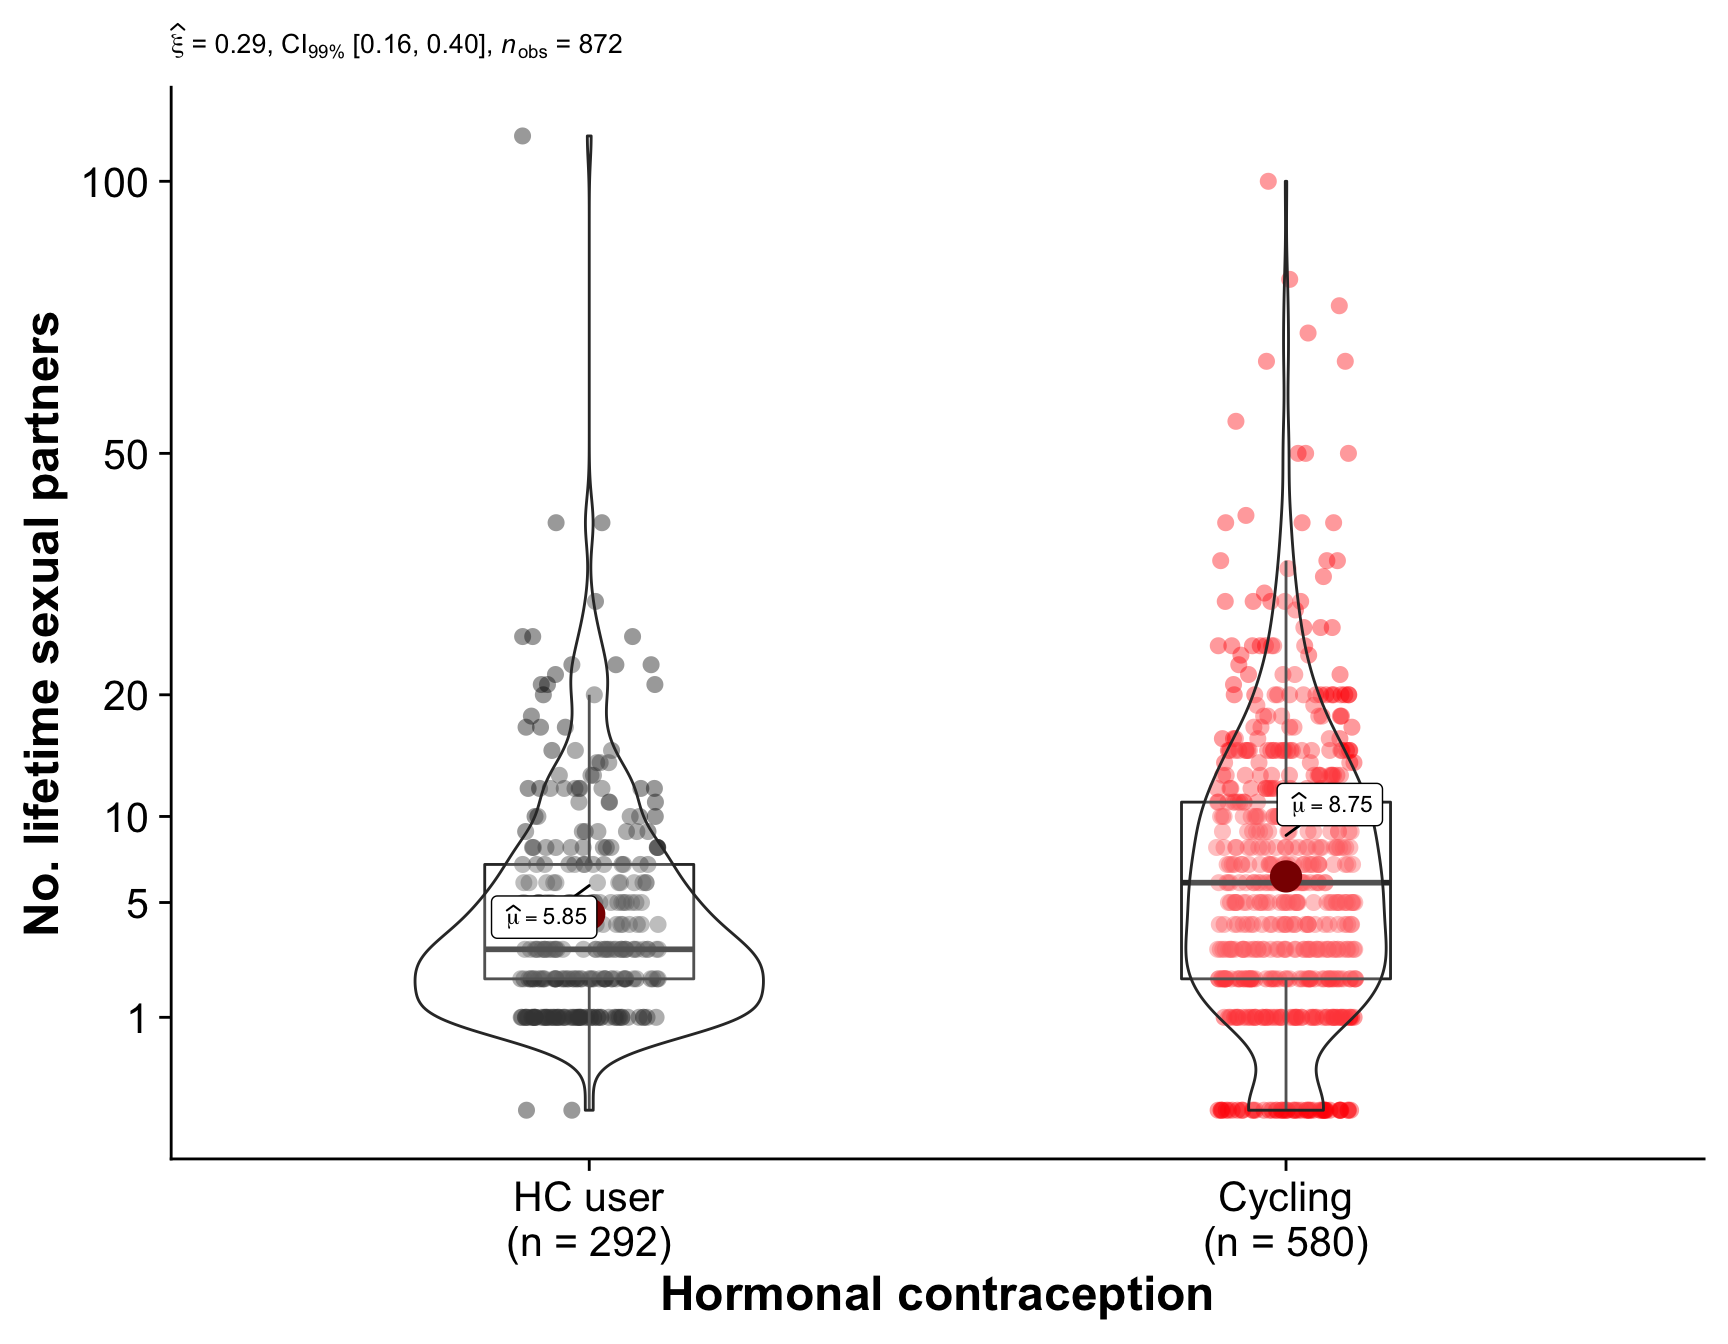 Comparison of the hormonal contraception users (our quasi-control group) with women who are regularly cycling. The plot shows the distribution of values in each group and the results of Yuen's test for trimmed means (10% trimmed).